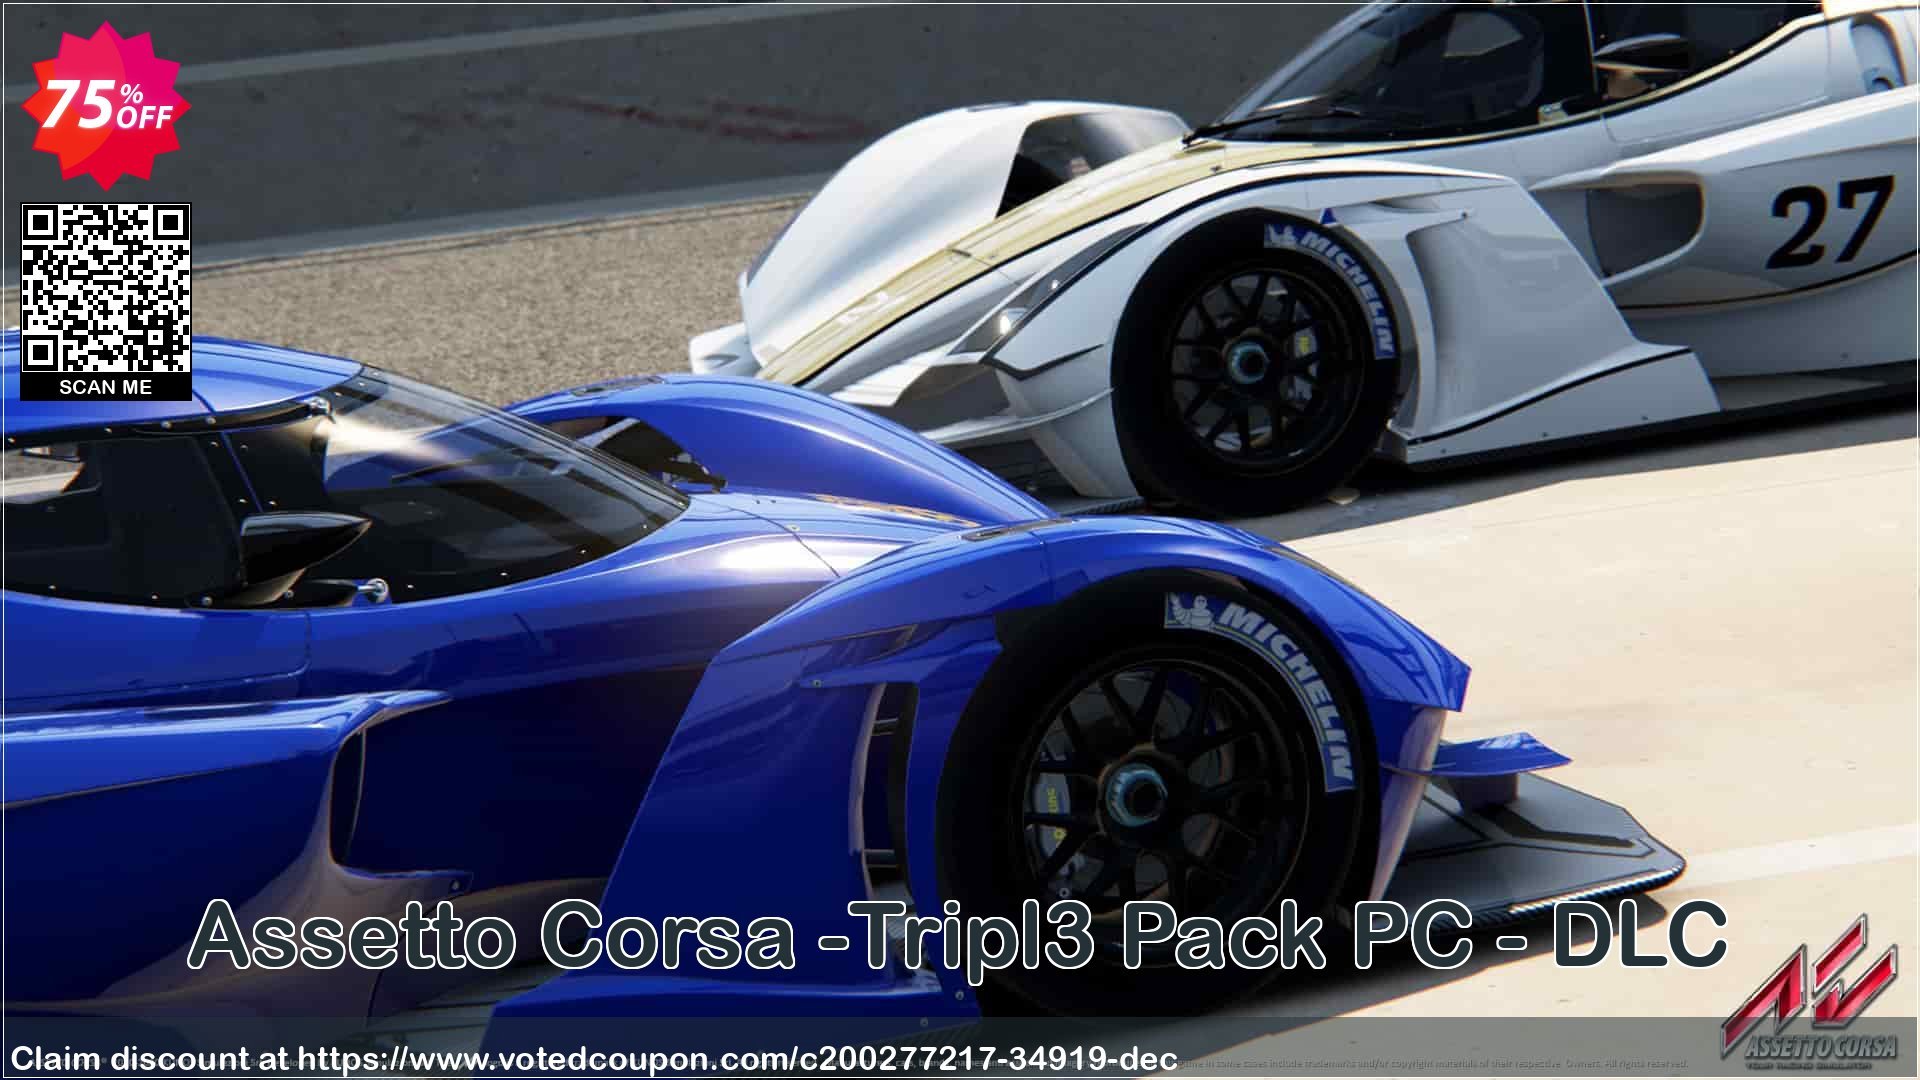 Assetto Corsa -Tripl3 Pack PC - DLC Coupon Code May 2024, 75% OFF - VotedCoupon